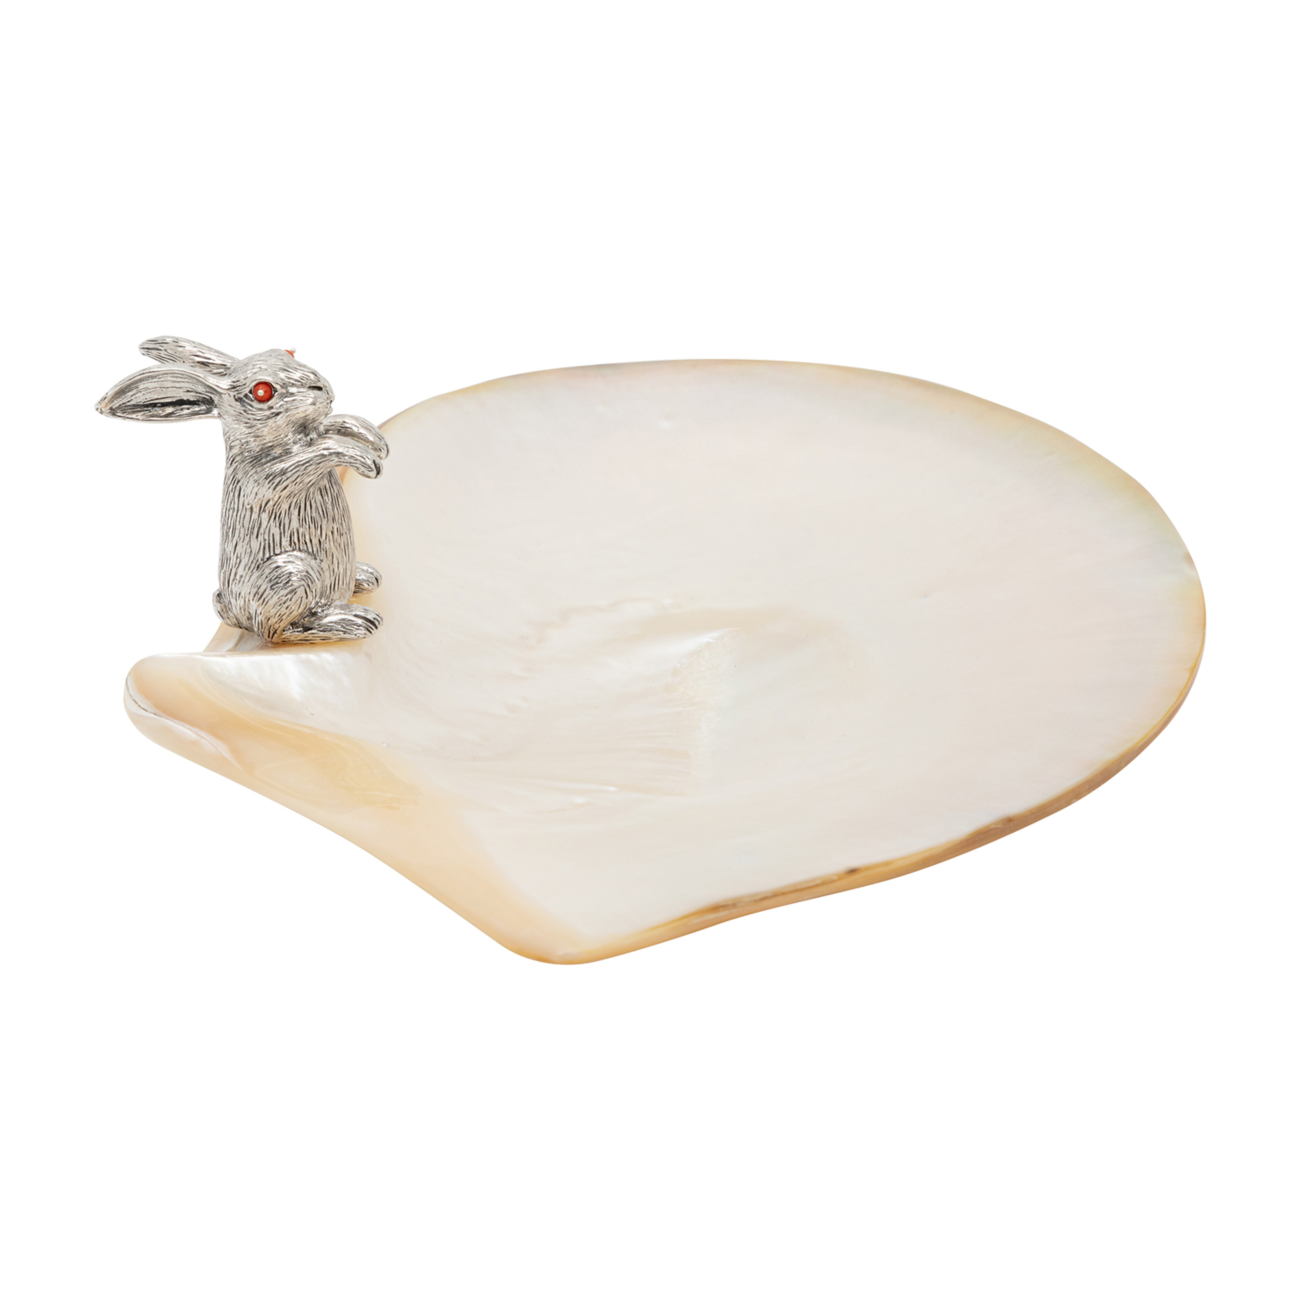 Mother of Pearl Canape Plate with Hopping Silver Rabbit